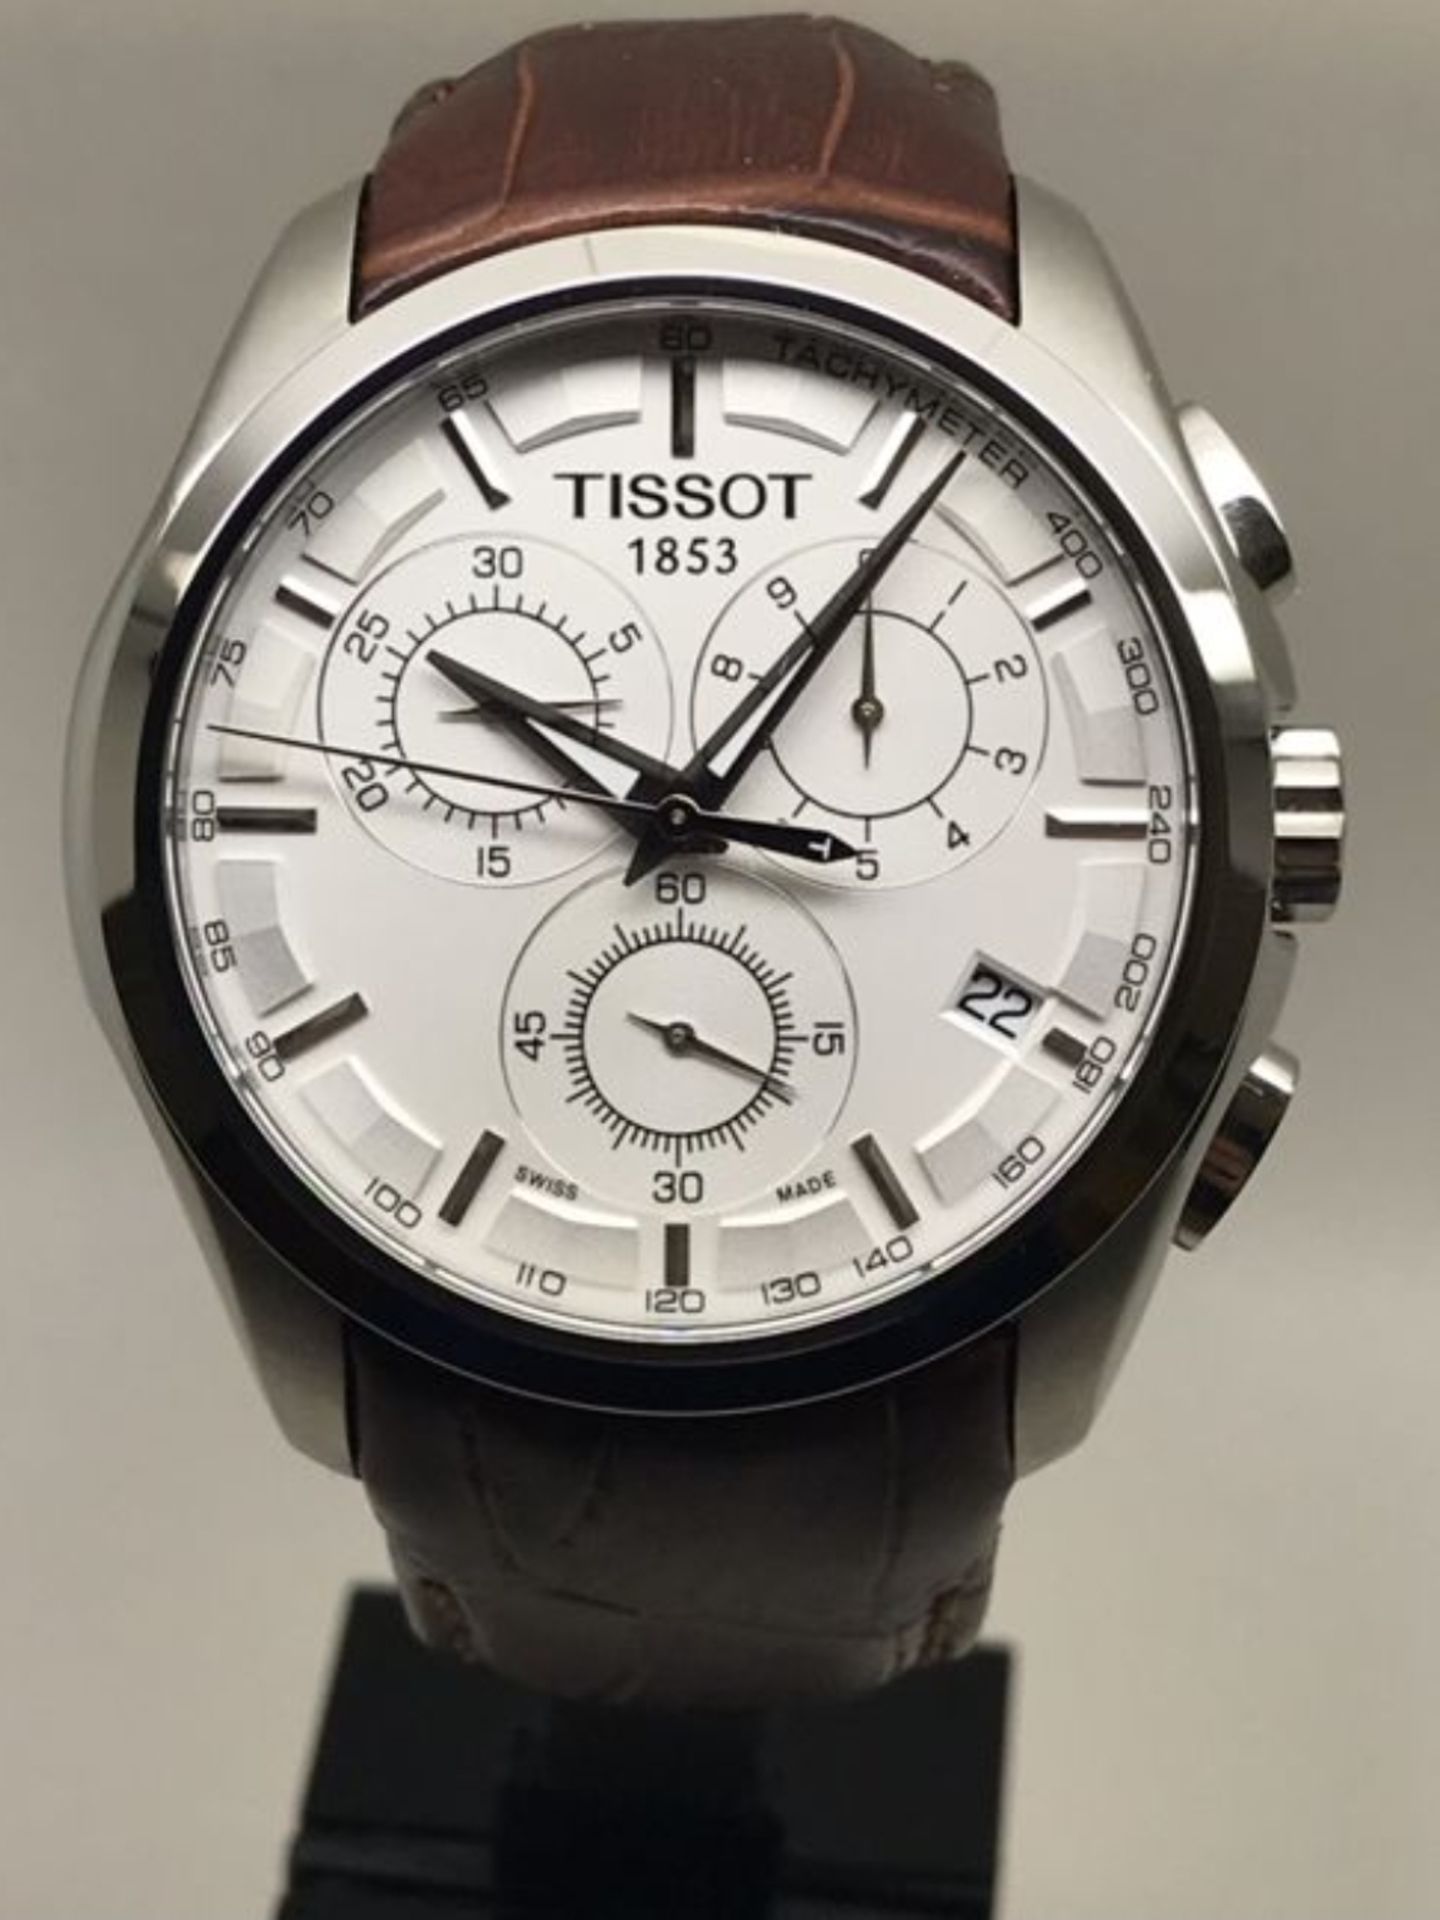 Tissot - Couturier Chronograph - T035.617.16.031.00 - Men's Watch - Image 2 of 8